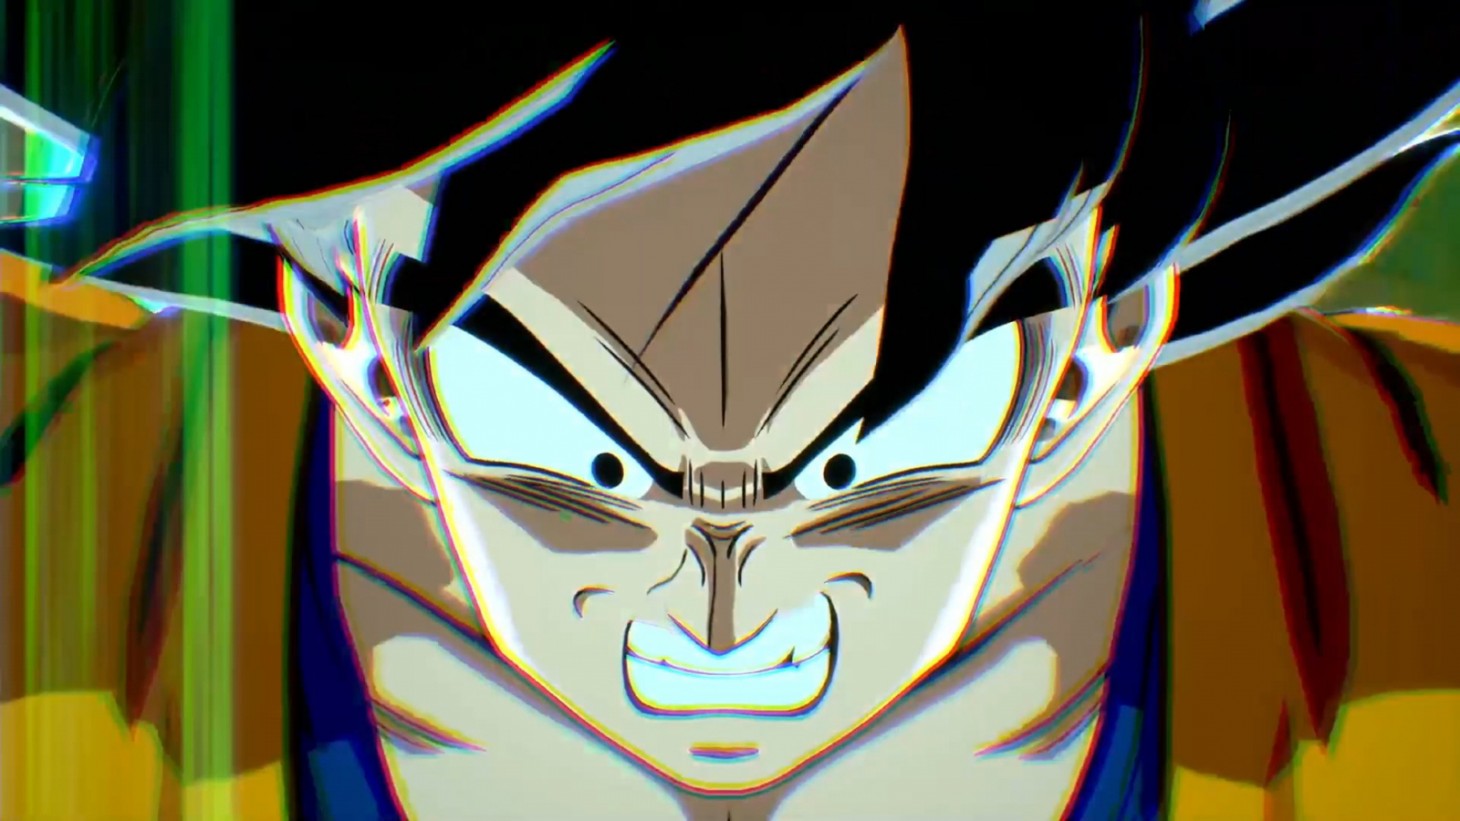 Its just Drip Goku. There's nothing different! Walt a minute